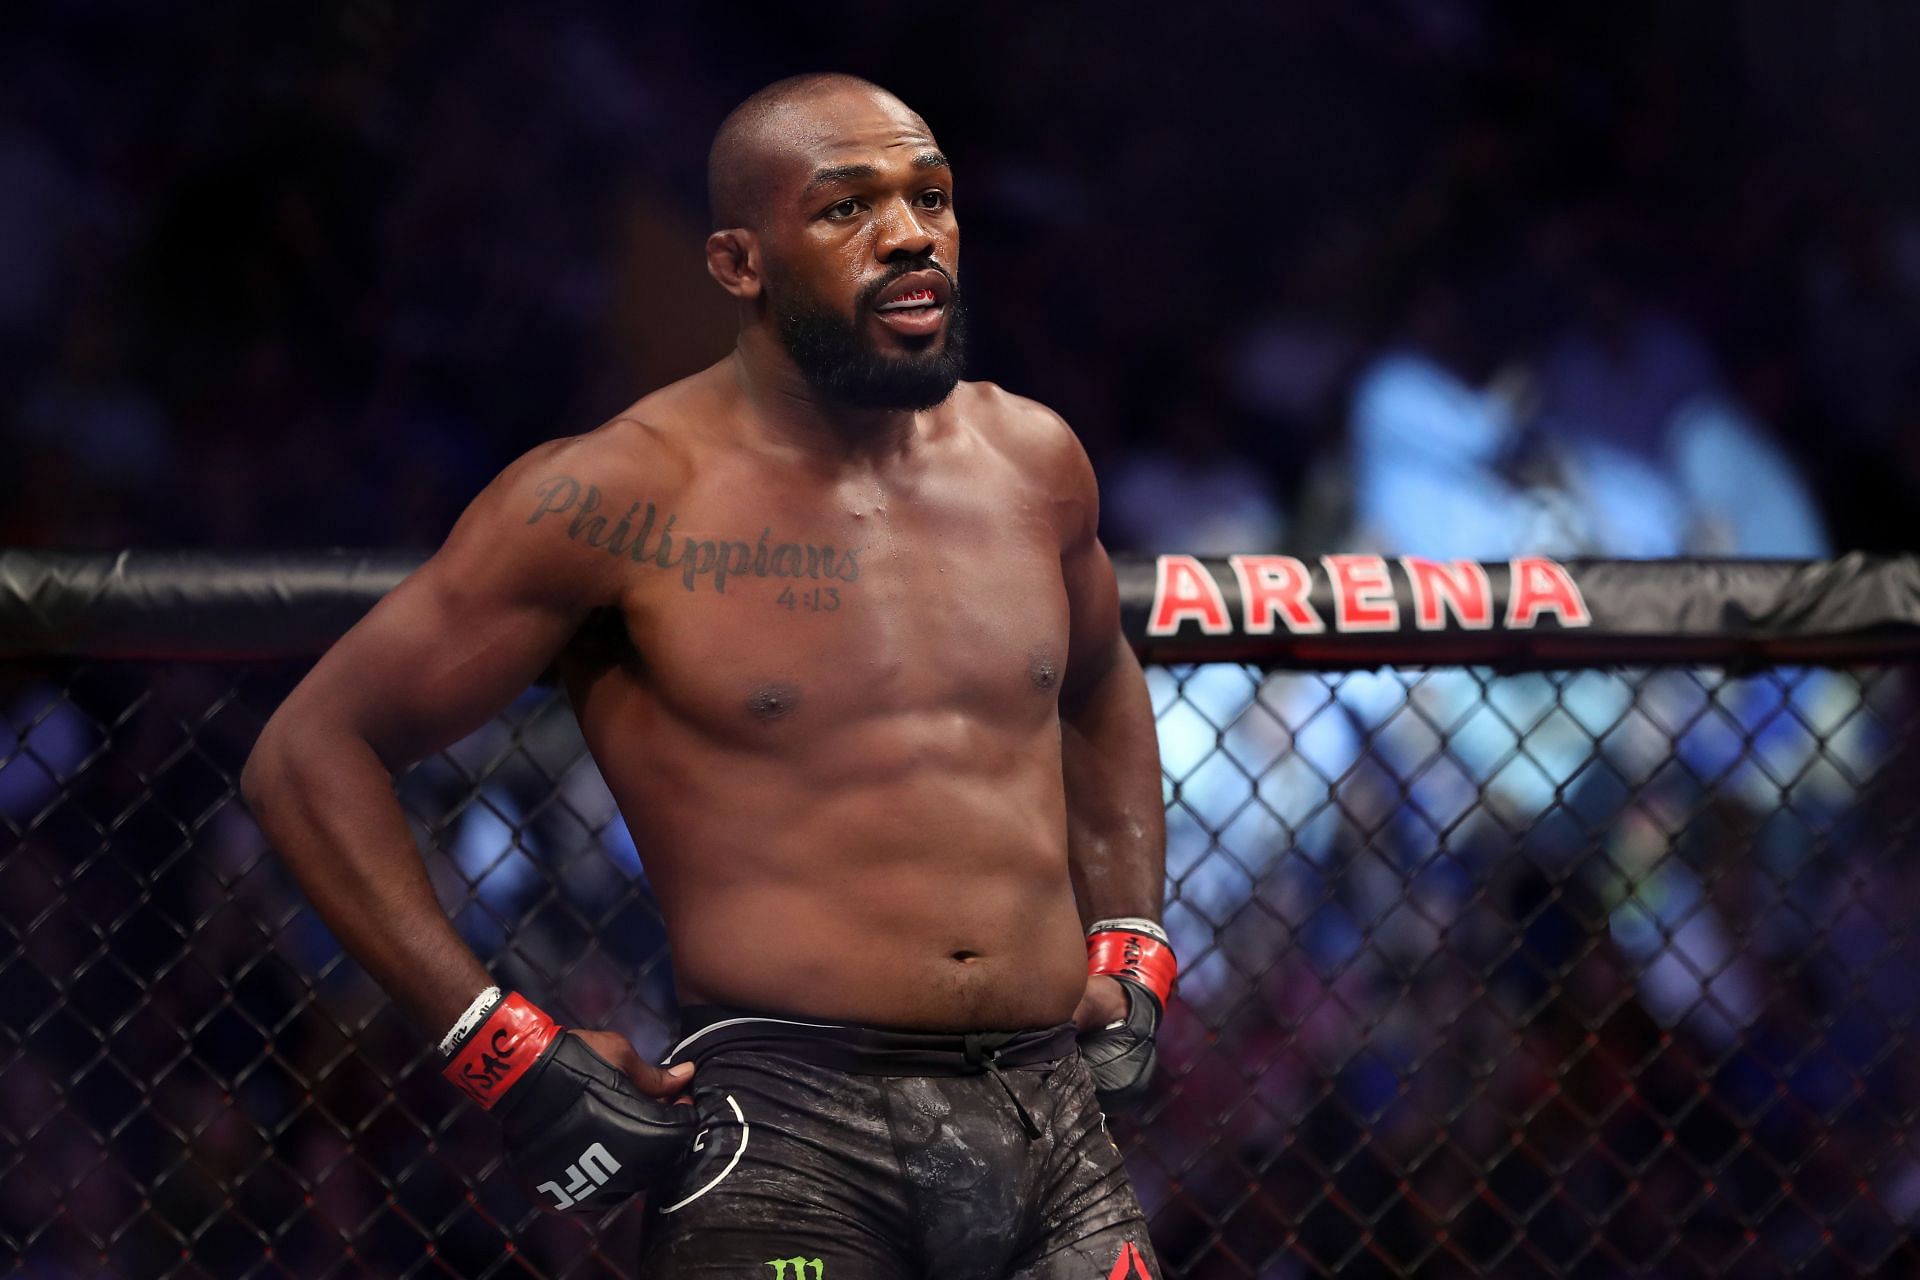 Jon Jones is yet to compete in the UFC heavyweight division